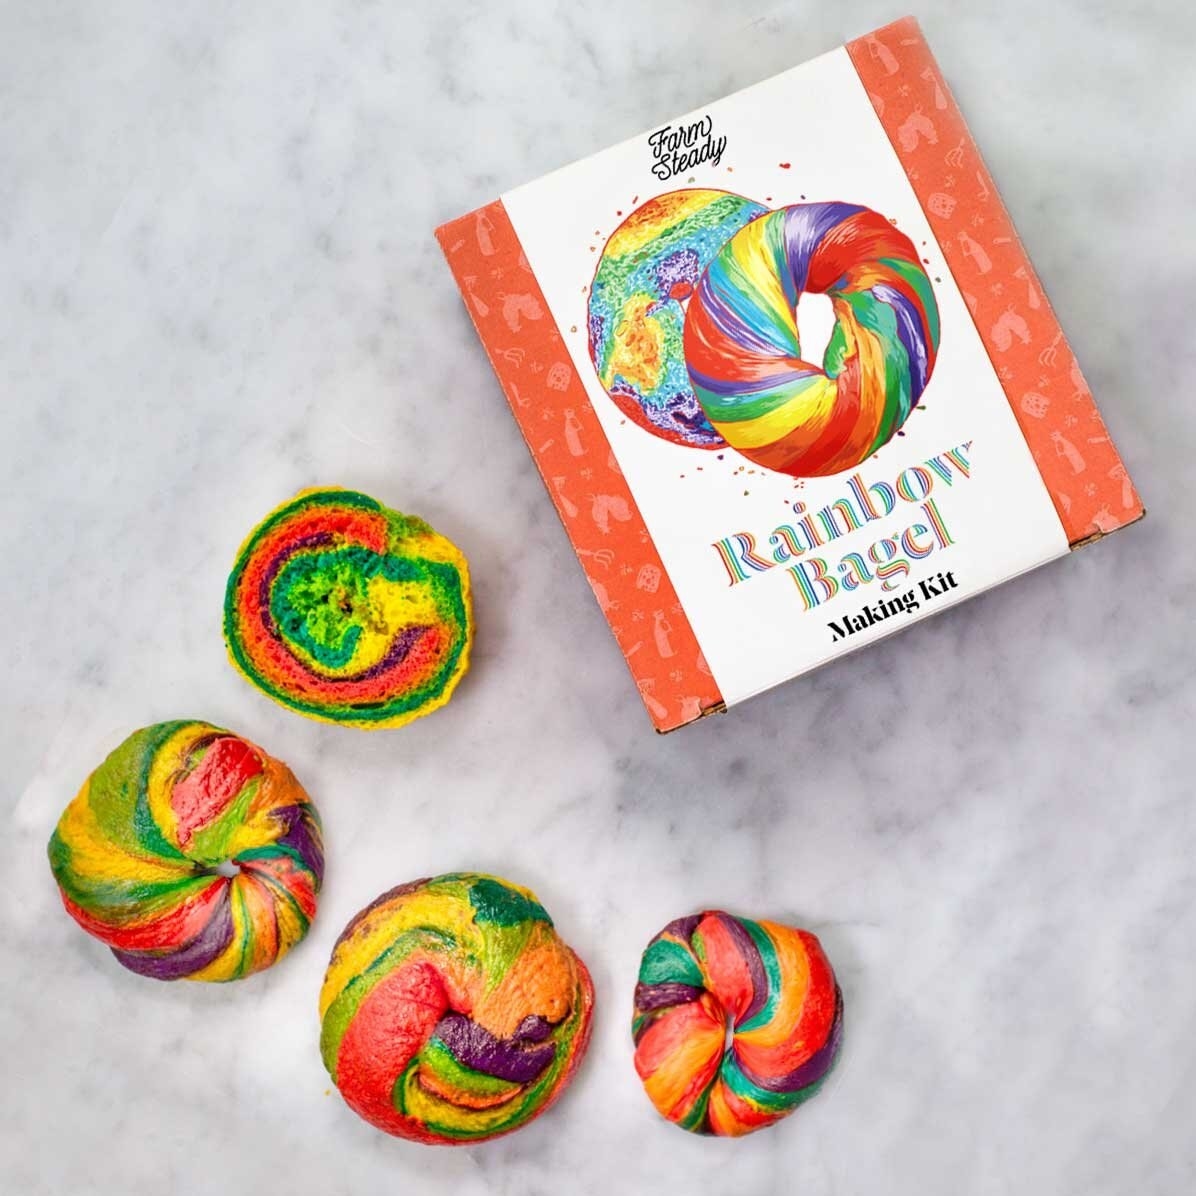 a bunch of rainbow bagels next to a rainbow bagel making kit